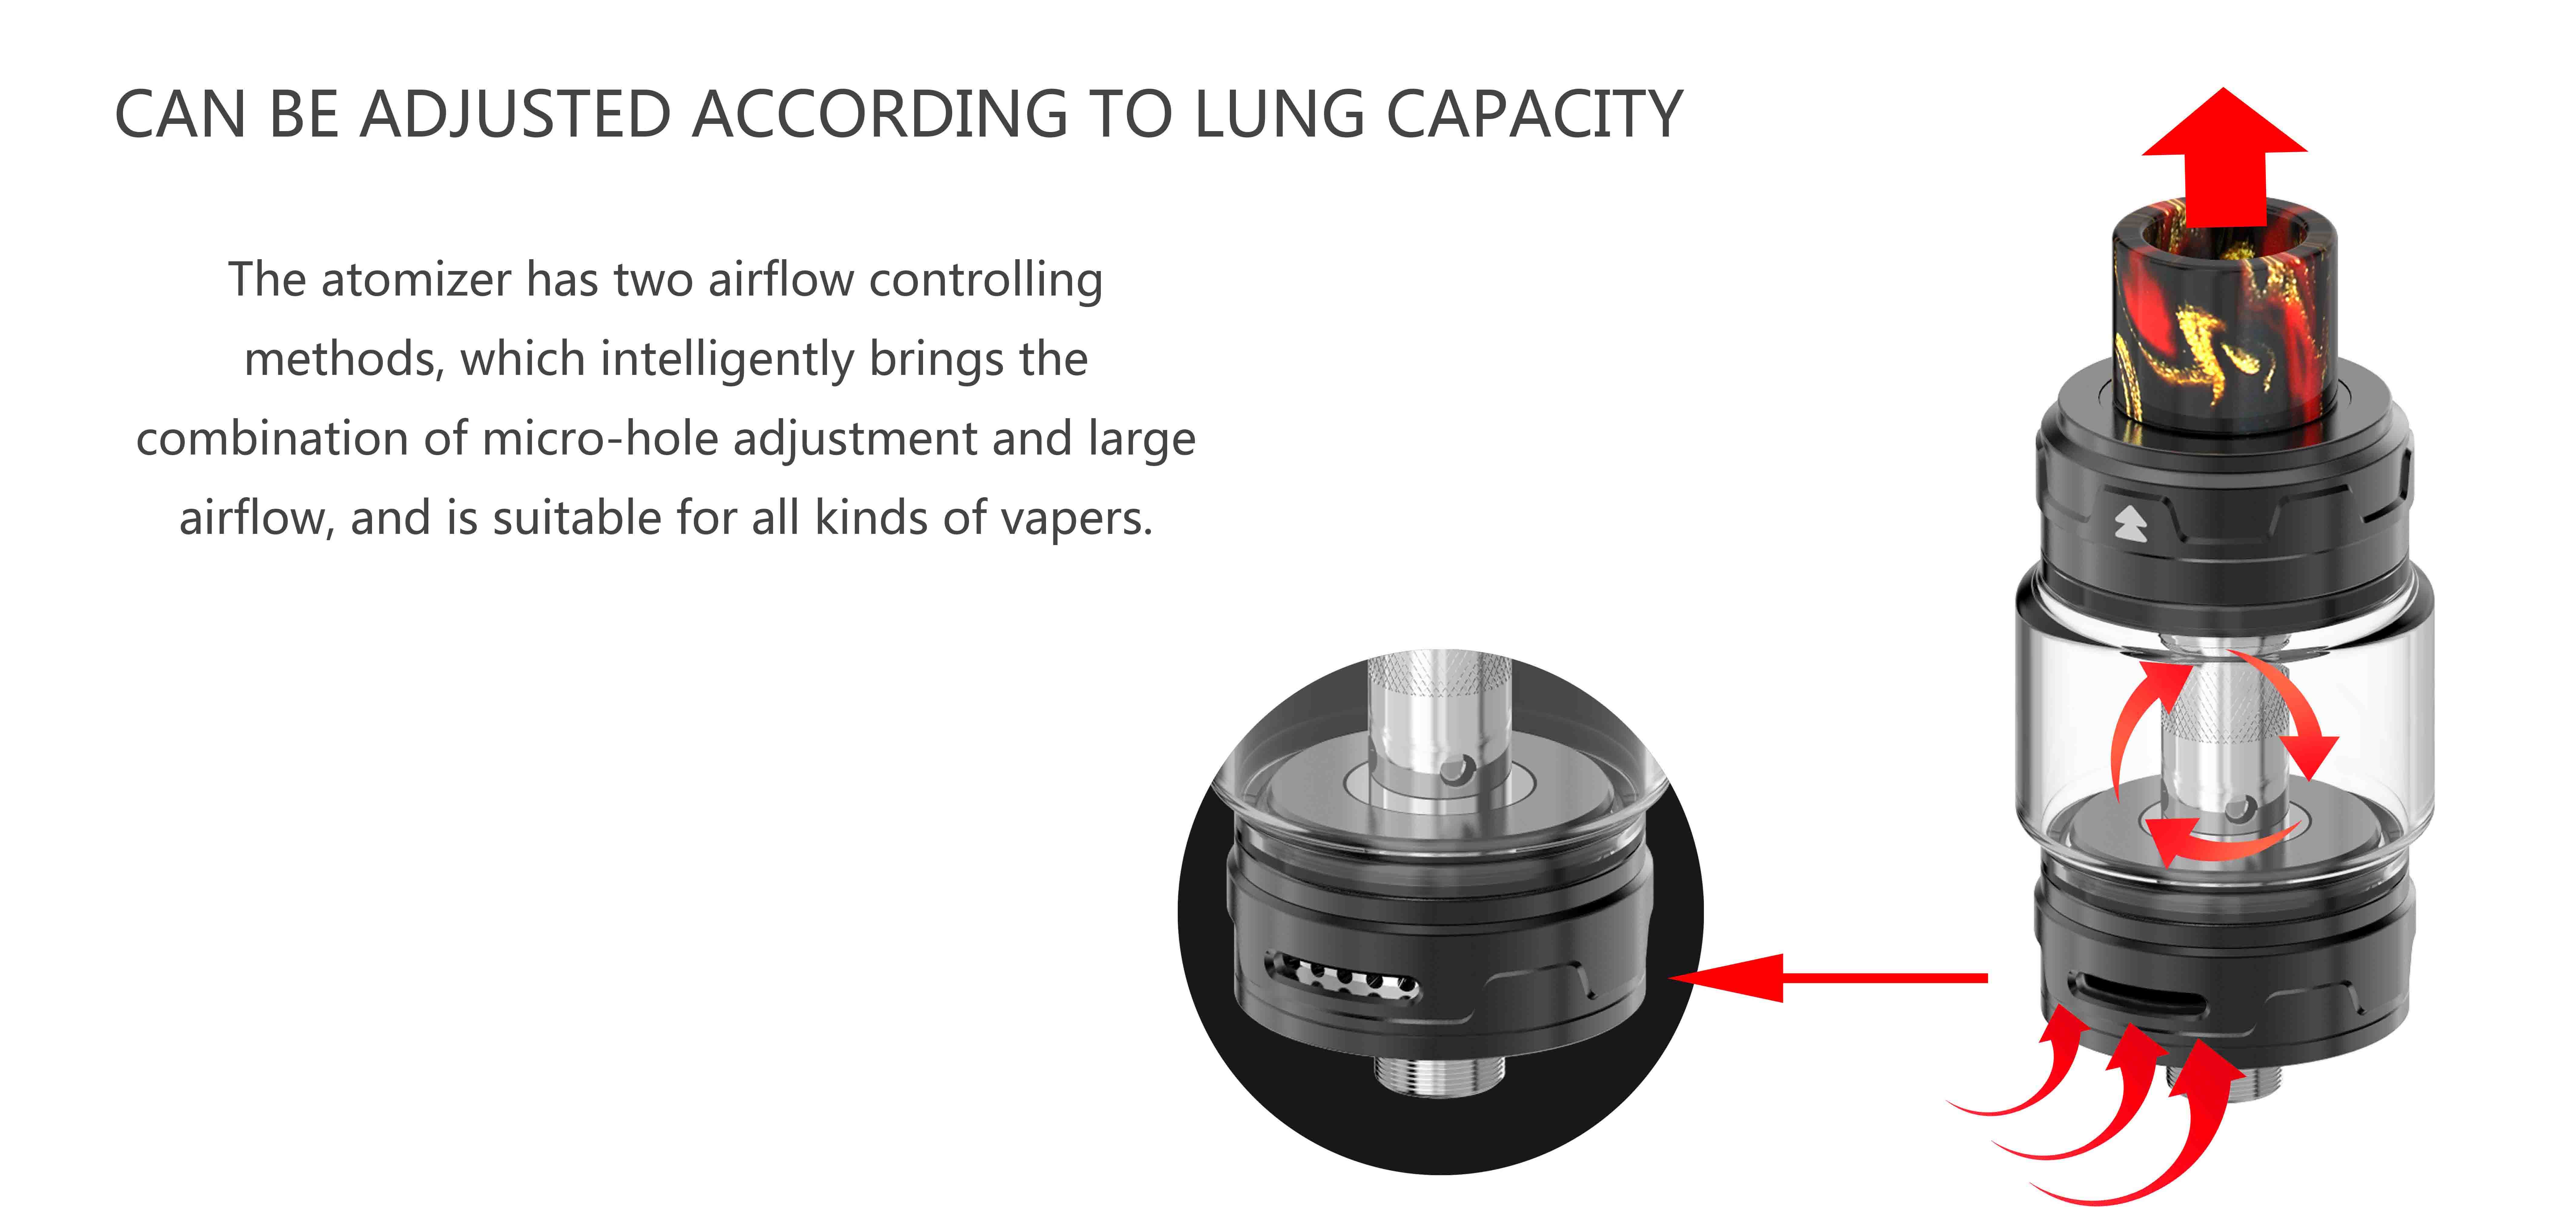 Can be adjusted according to lung capacity